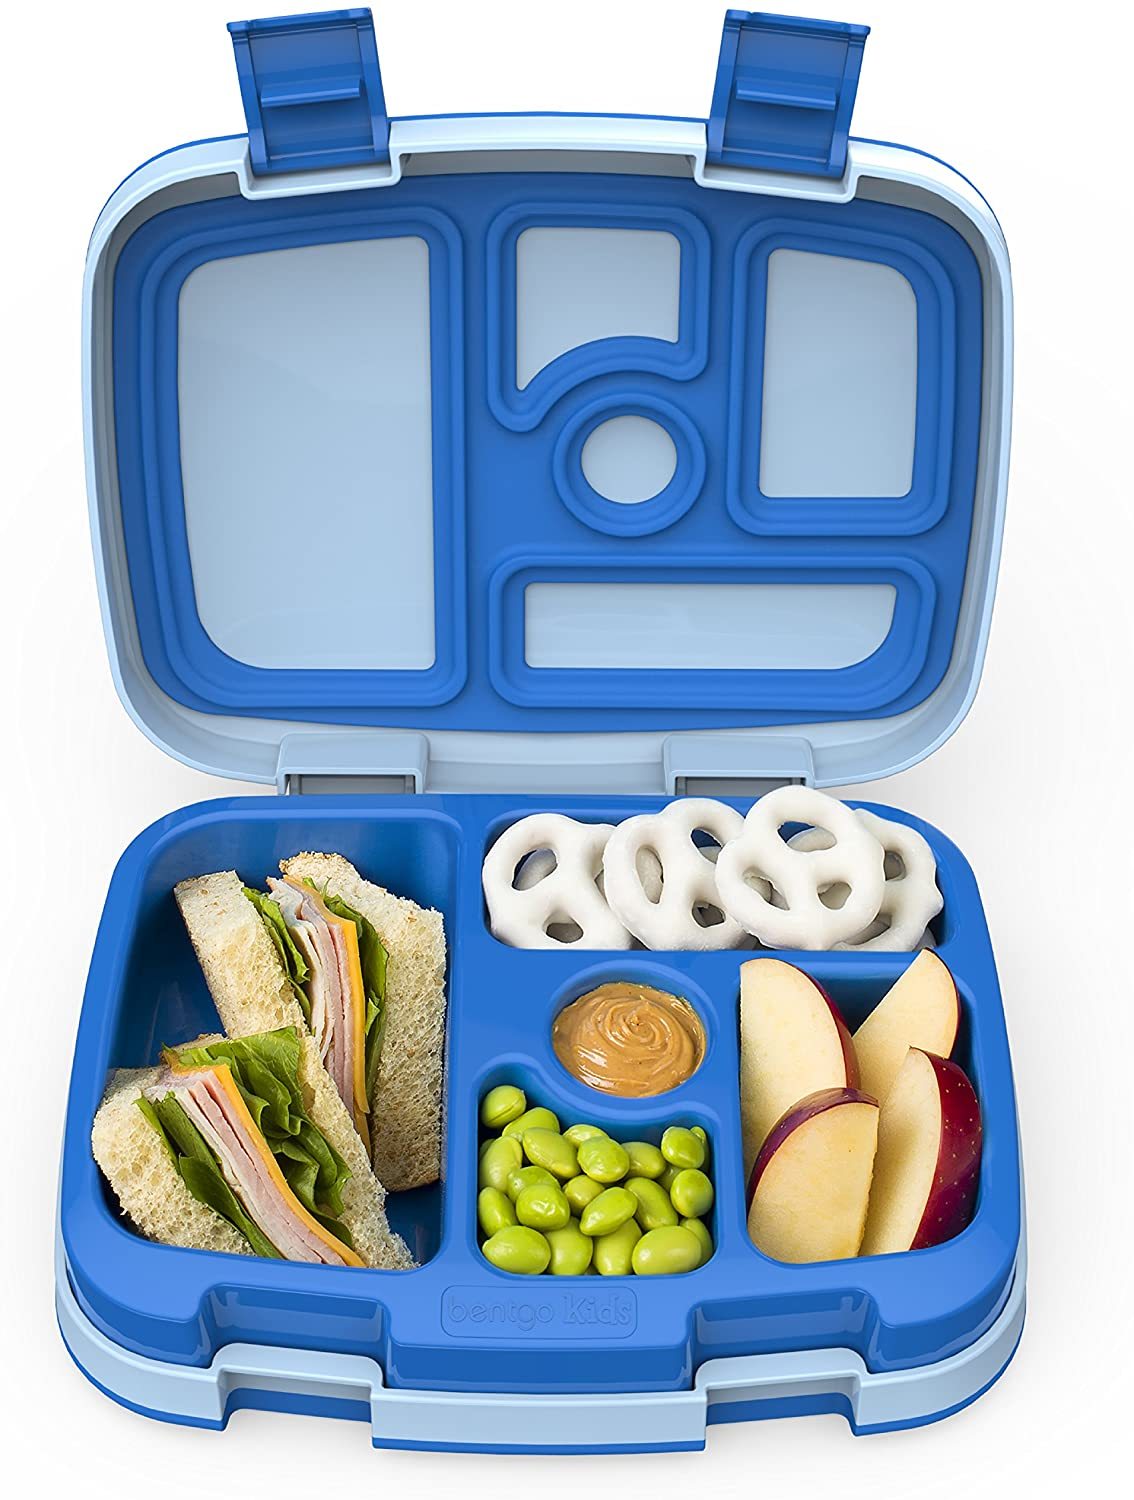 Primary image for Bentgo Kids Lunch Box Styled Lunch Solution Offers Durable Meal, Snack Packing 